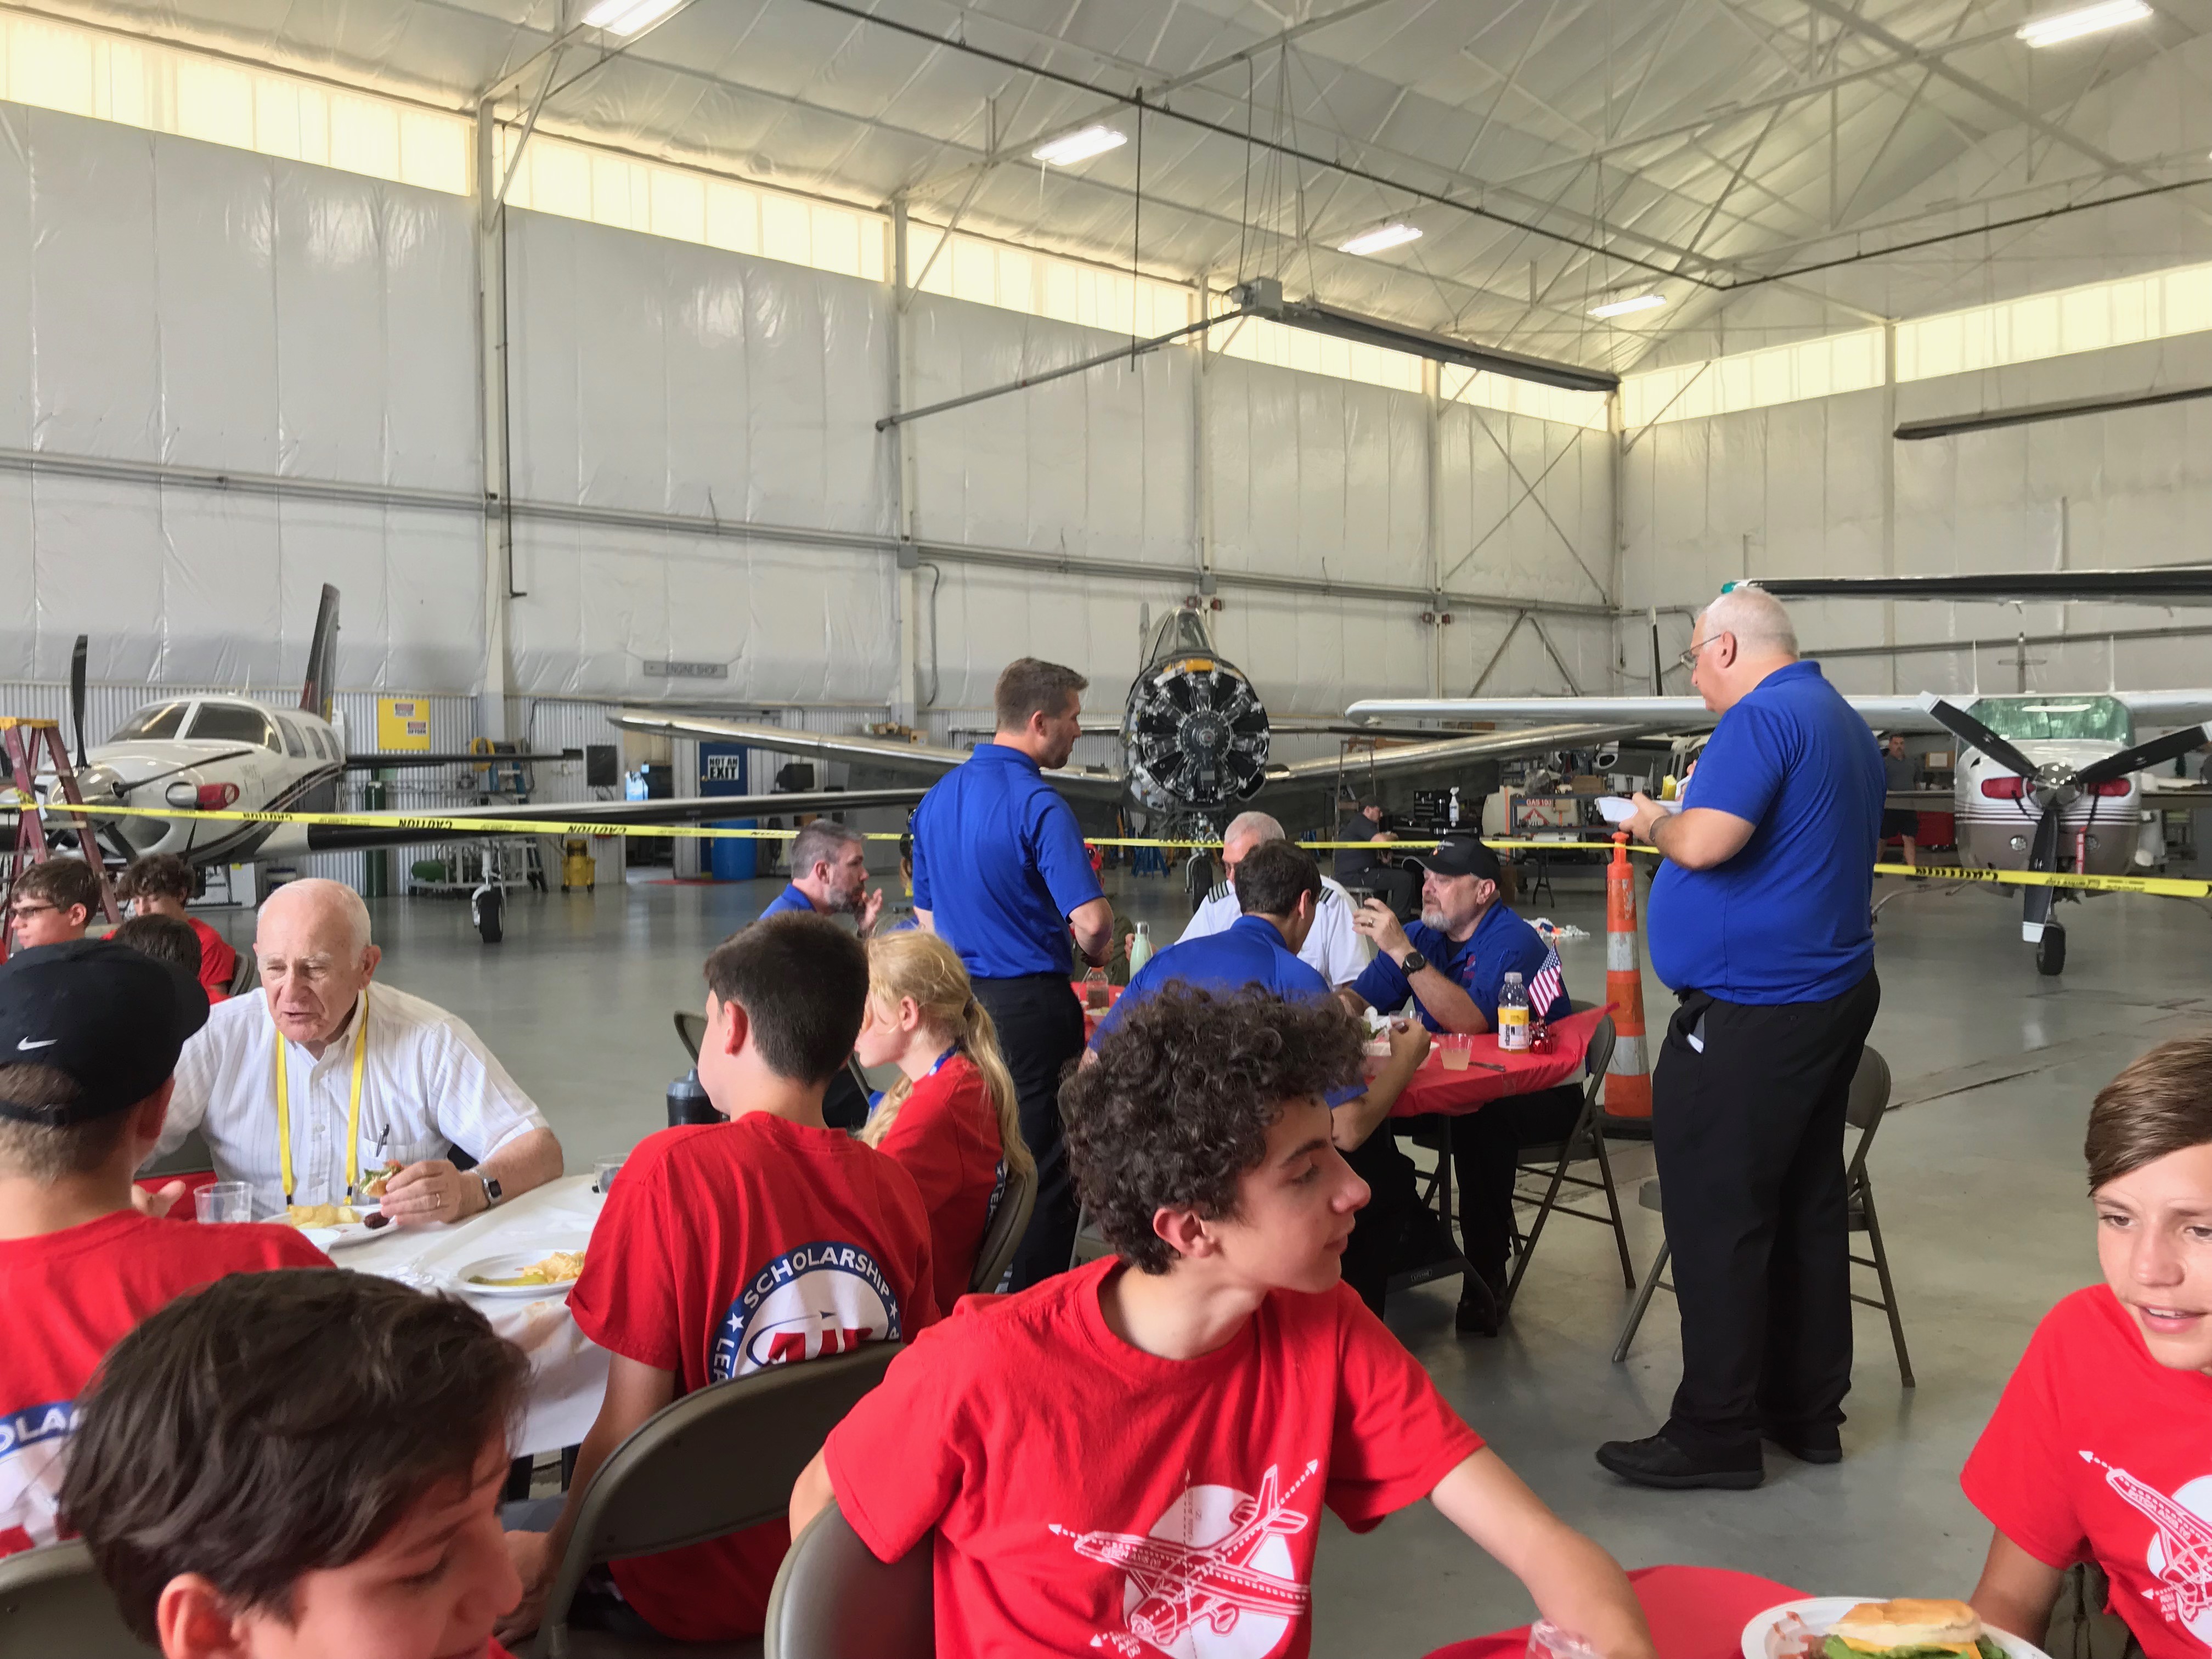 Students join us for lunch at Fly Day on last day of Air Camp